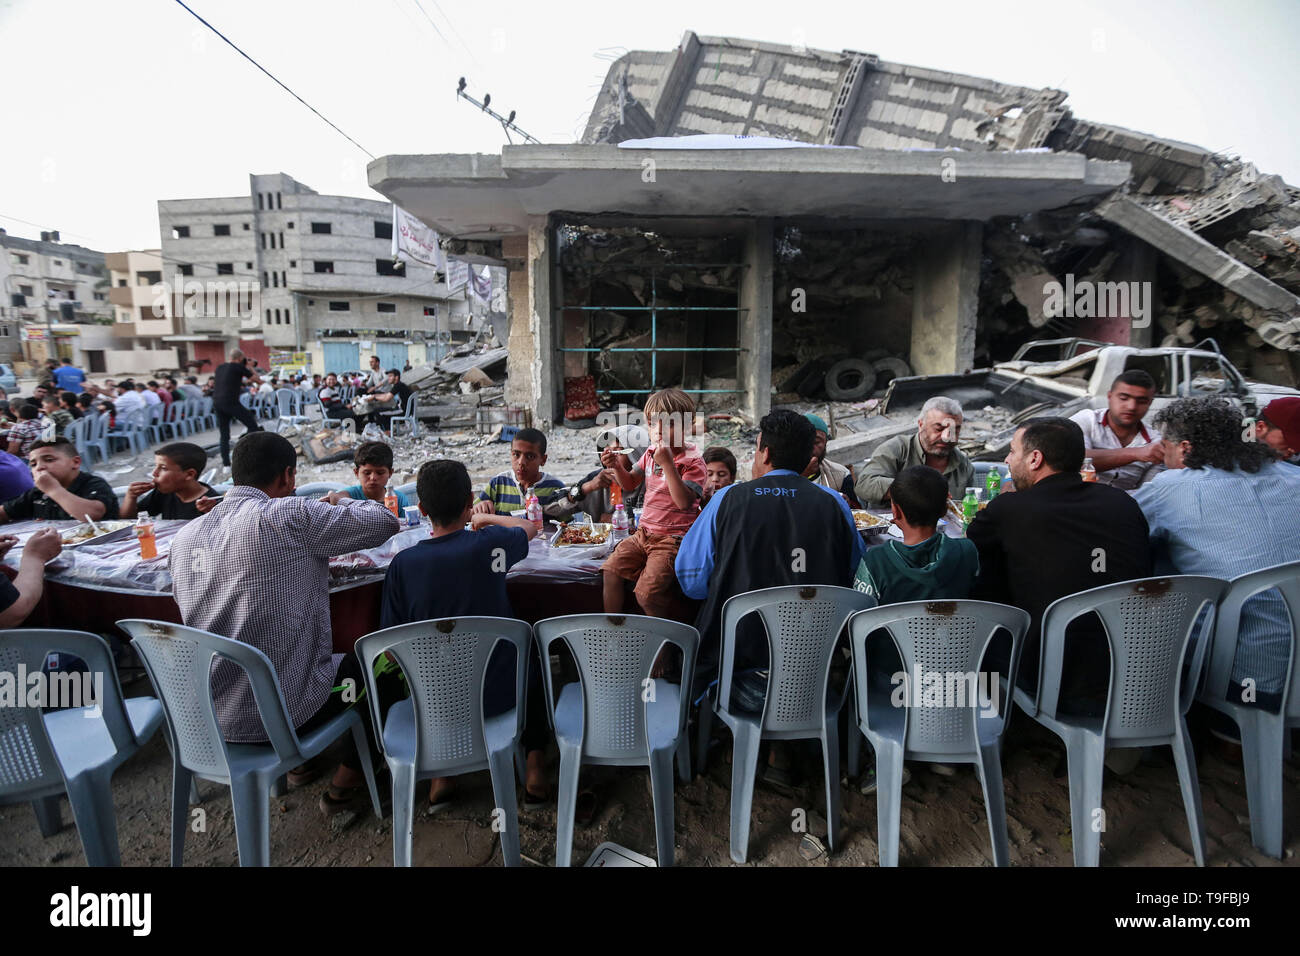 Gaza, Palestinian Territories. 19th May, 2019. Palestinian families break their fast during the Muslim holy fasting month of Ramadan, next to the remains of a building that was destroyed during Israeli air strikes. Credit: Mohammed Talatene/dpa/Alamy Live News Stock Photo